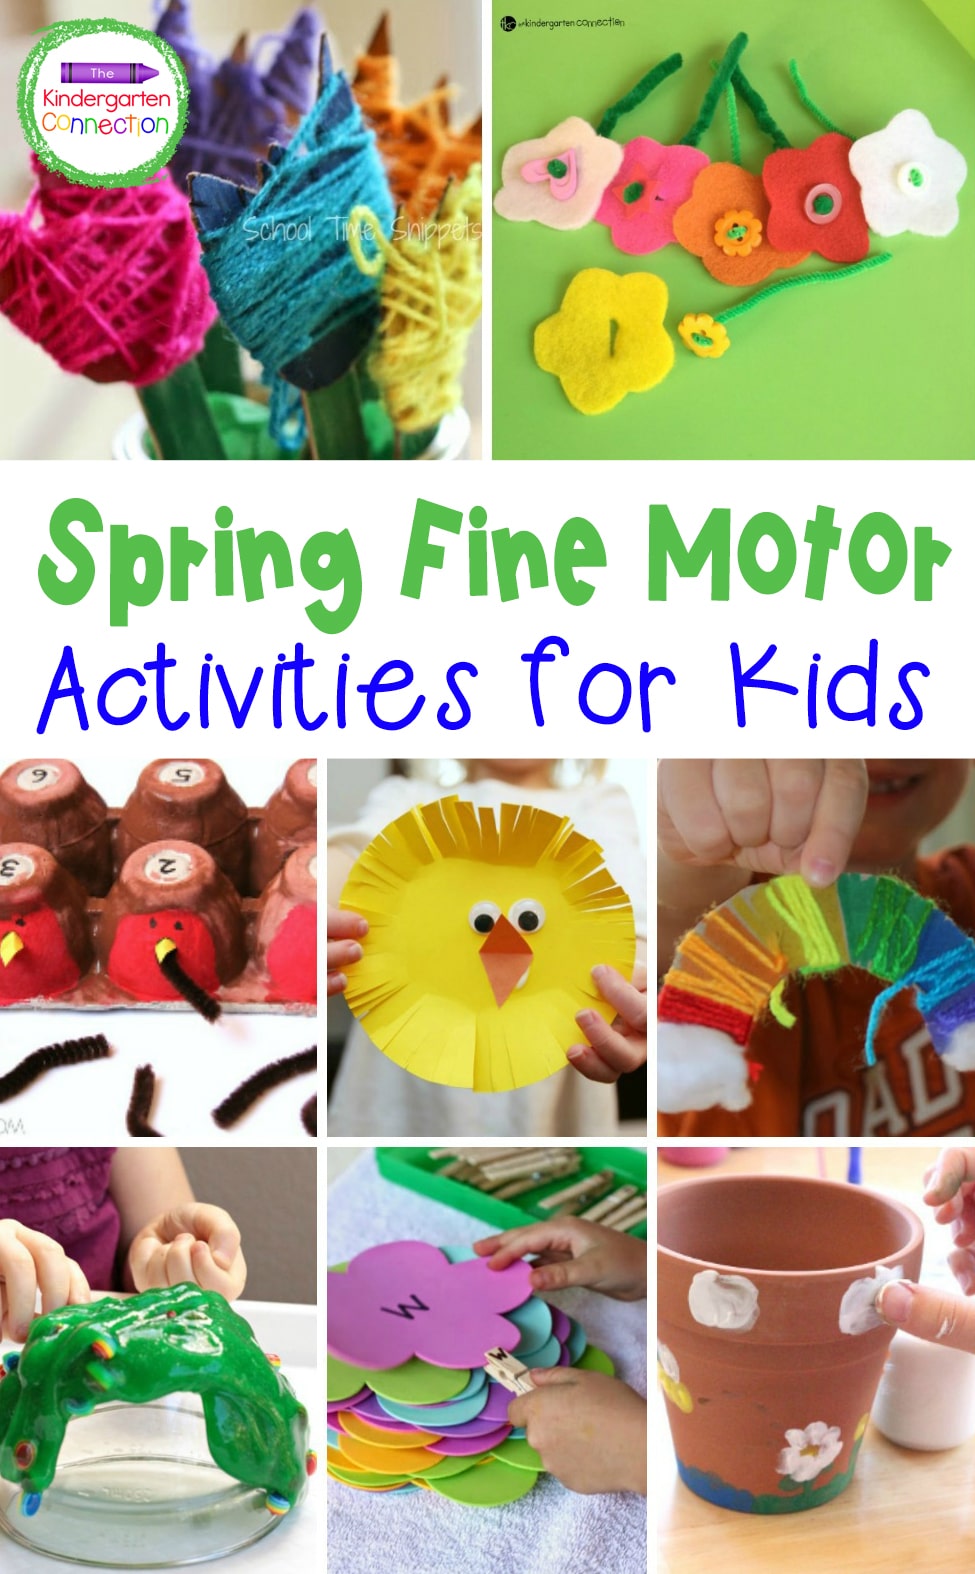 Children will have a blast practicing fine motor skills and creating with these Spring Fine Motor Activities for Kids!